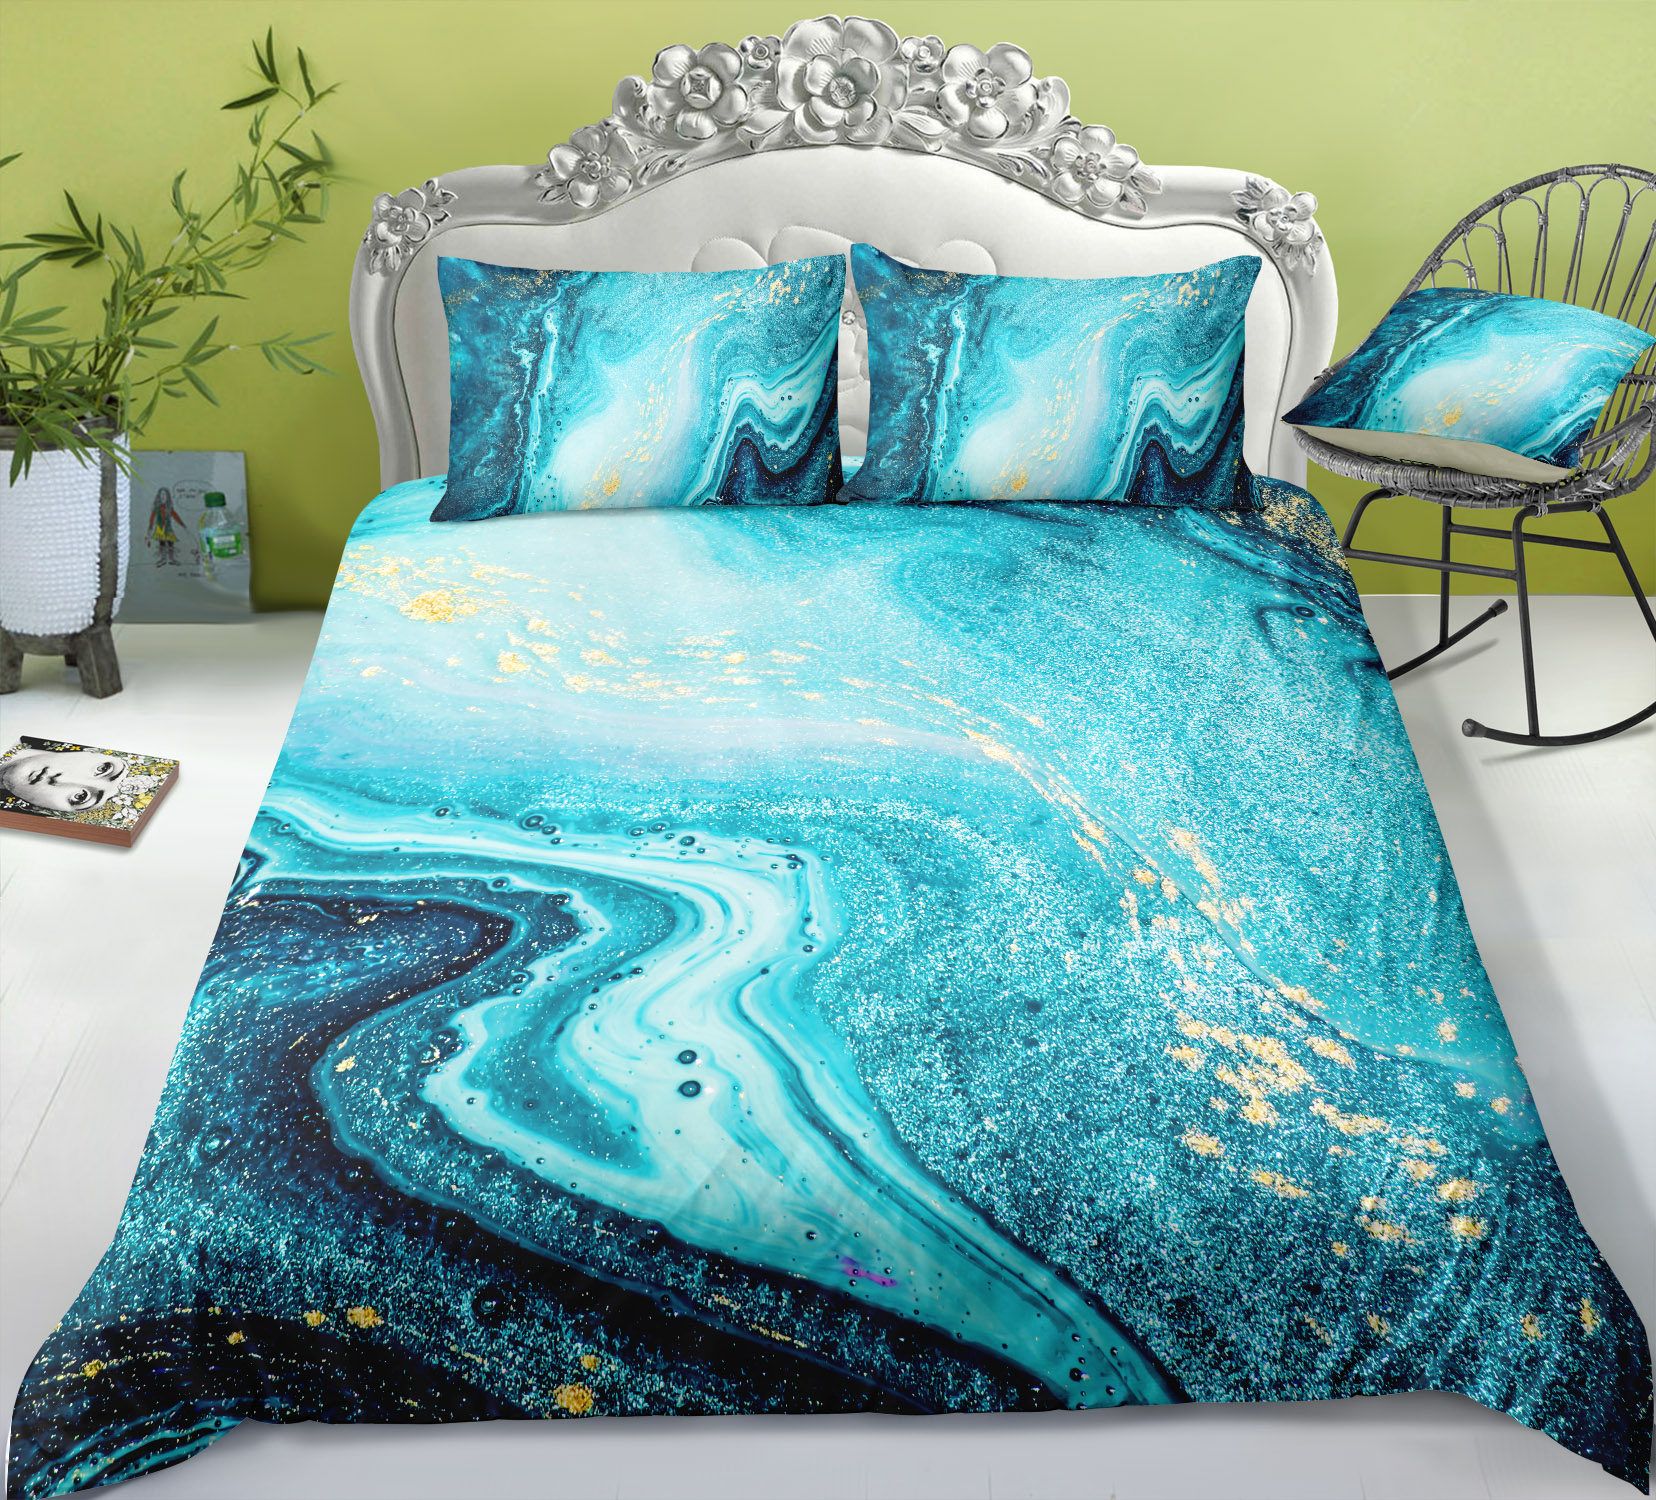 Blue Marble Bedding Set King Size, How To Put A Duvet Cover On King Size Bed